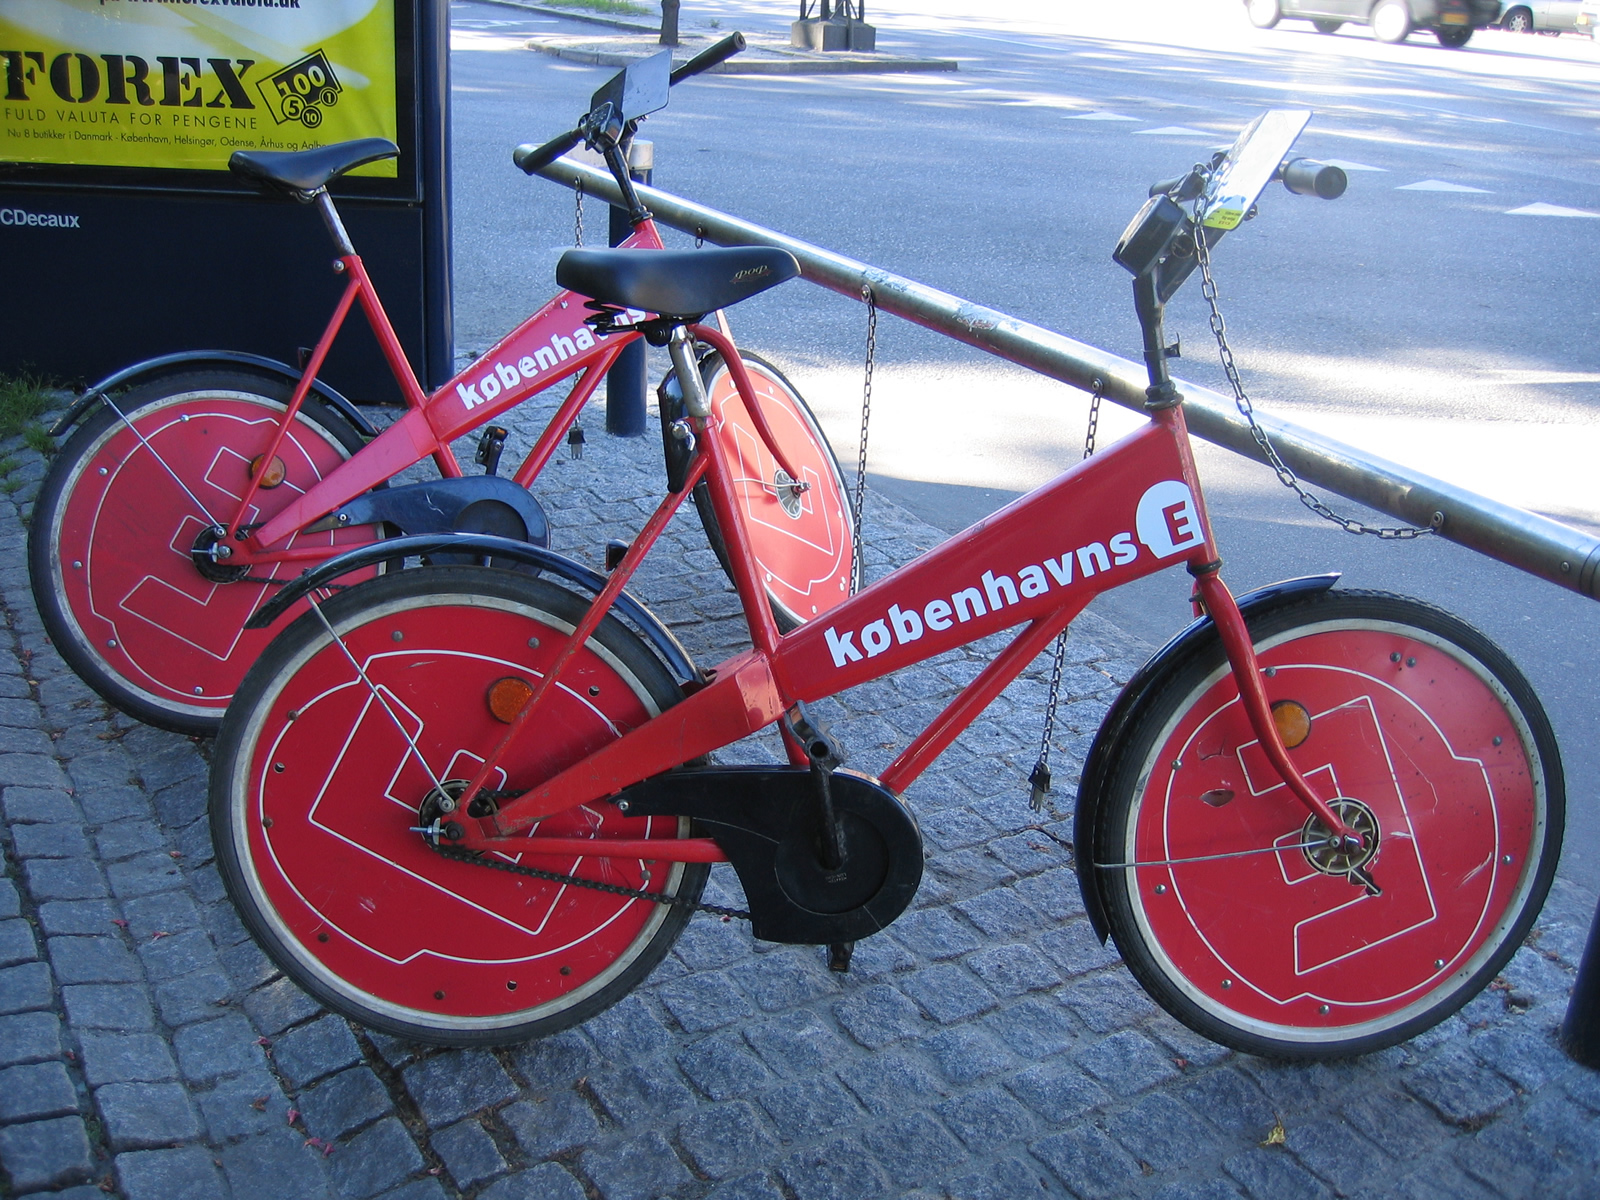 the red bicycle is parked beside the pole and road